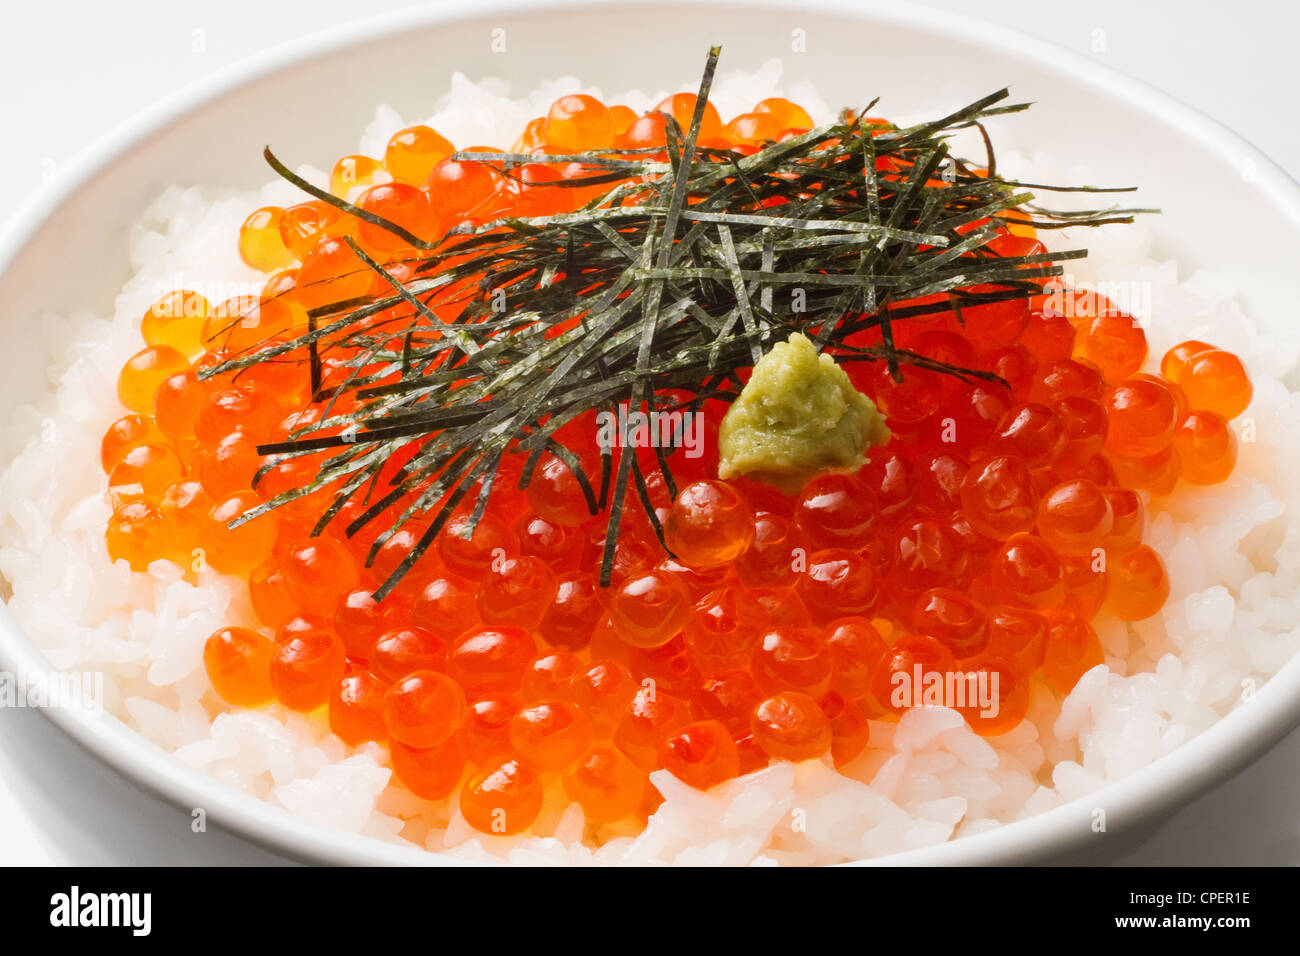 Boiled Rice And Caviar Stock Photo